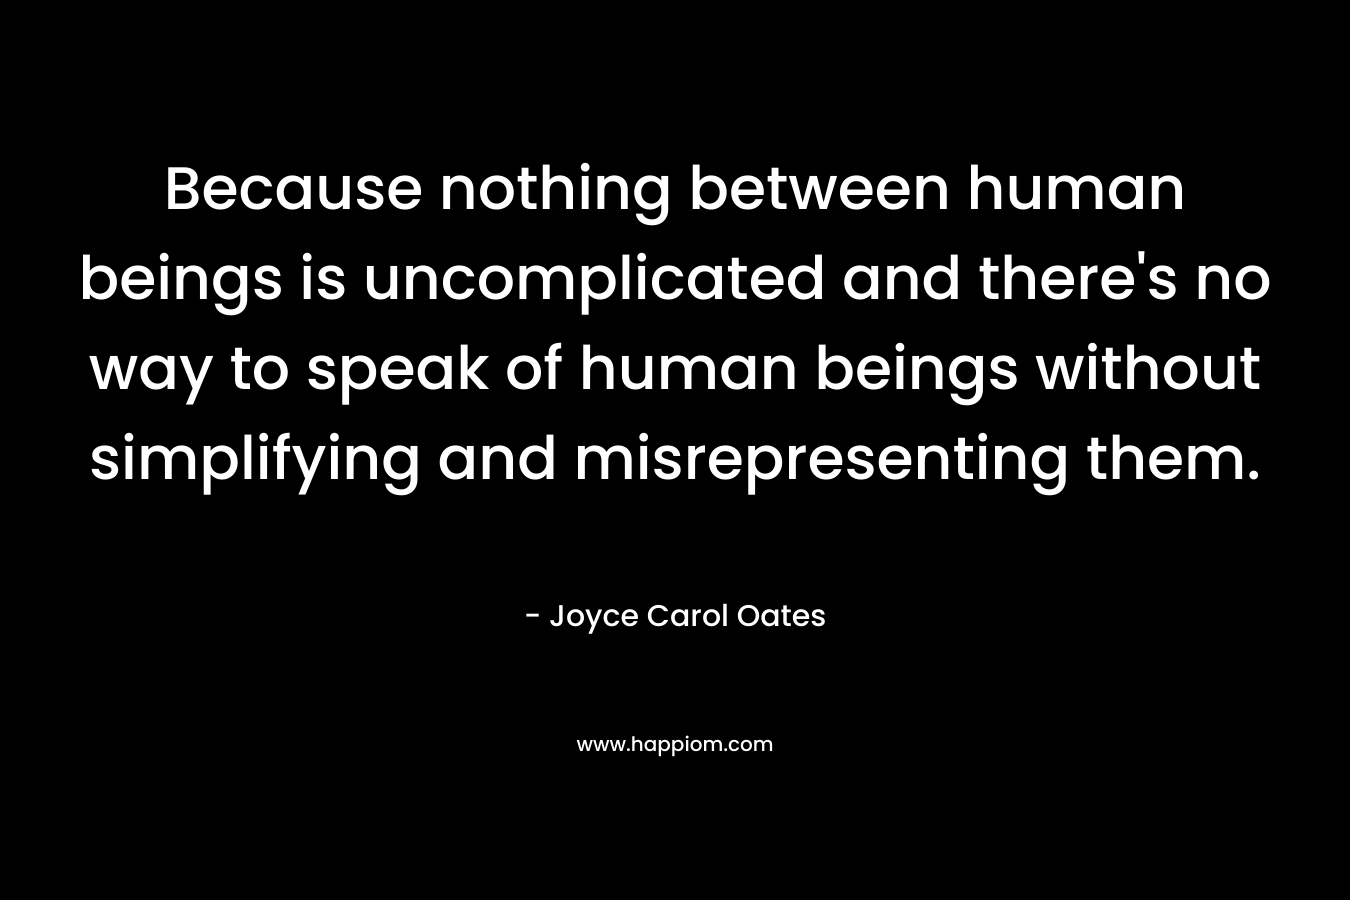 Because nothing between human beings is uncomplicated and there’s no way to speak of human beings without simplifying and misrepresenting them. – Joyce Carol Oates